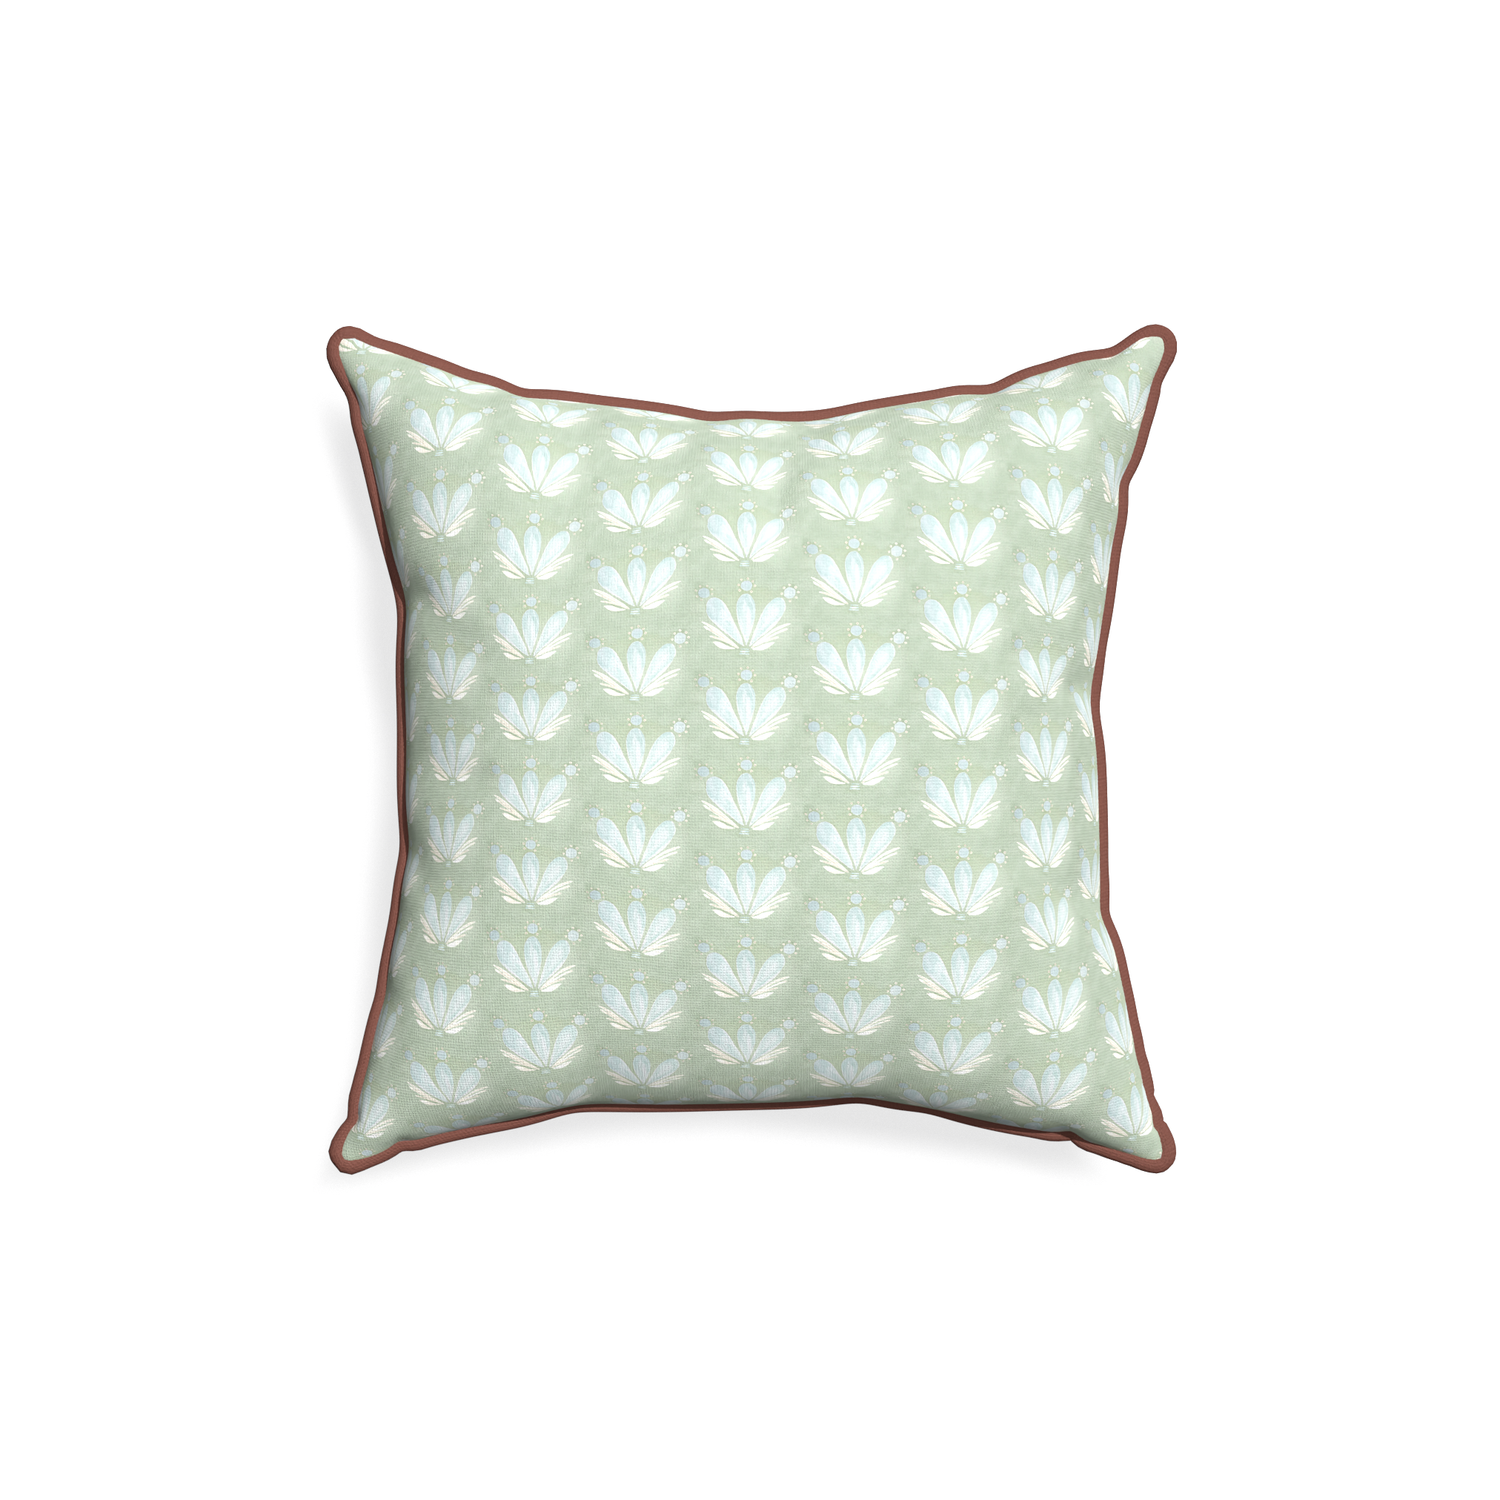 18-square serena sea salt custom blue & green floral drop repeatpillow with w piping on white background